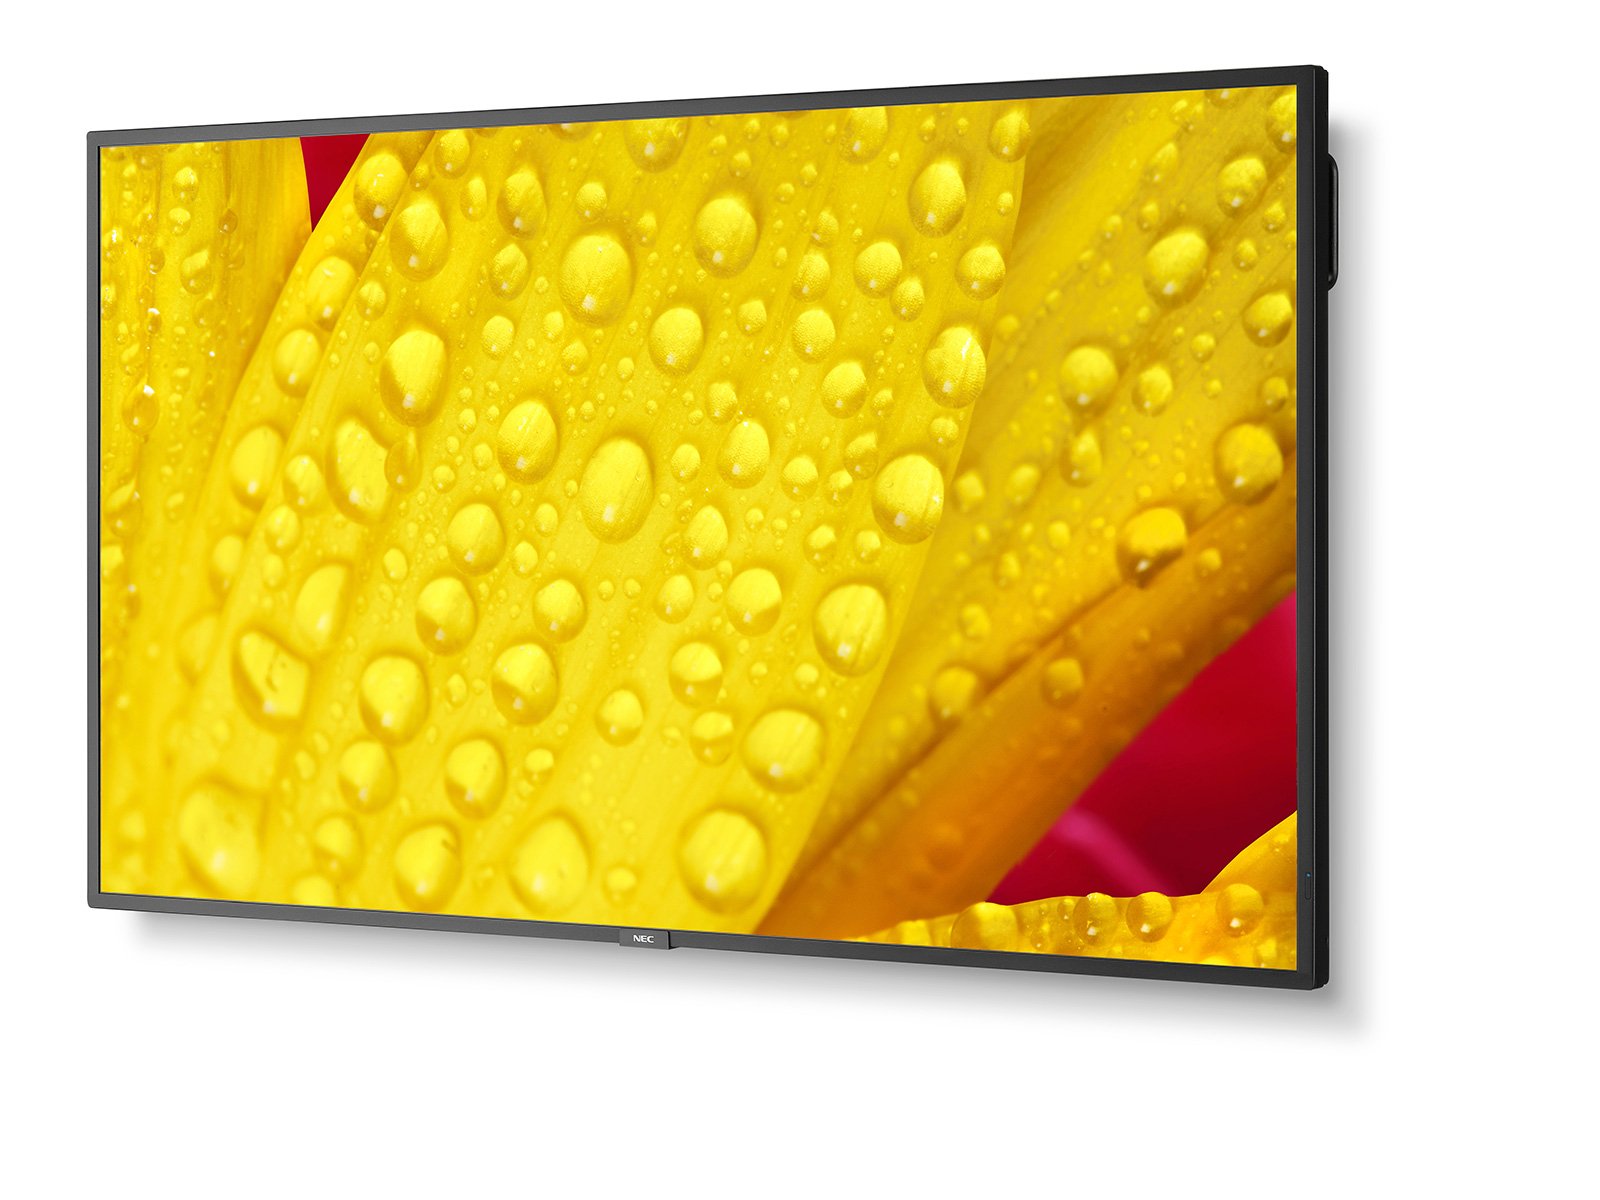 NEC MultiSync ME501 - 50 Inch - 400 cd/m² - Ultra HD - 3840x2160 Pixel - 18/7 - Message Essential Large Format Display